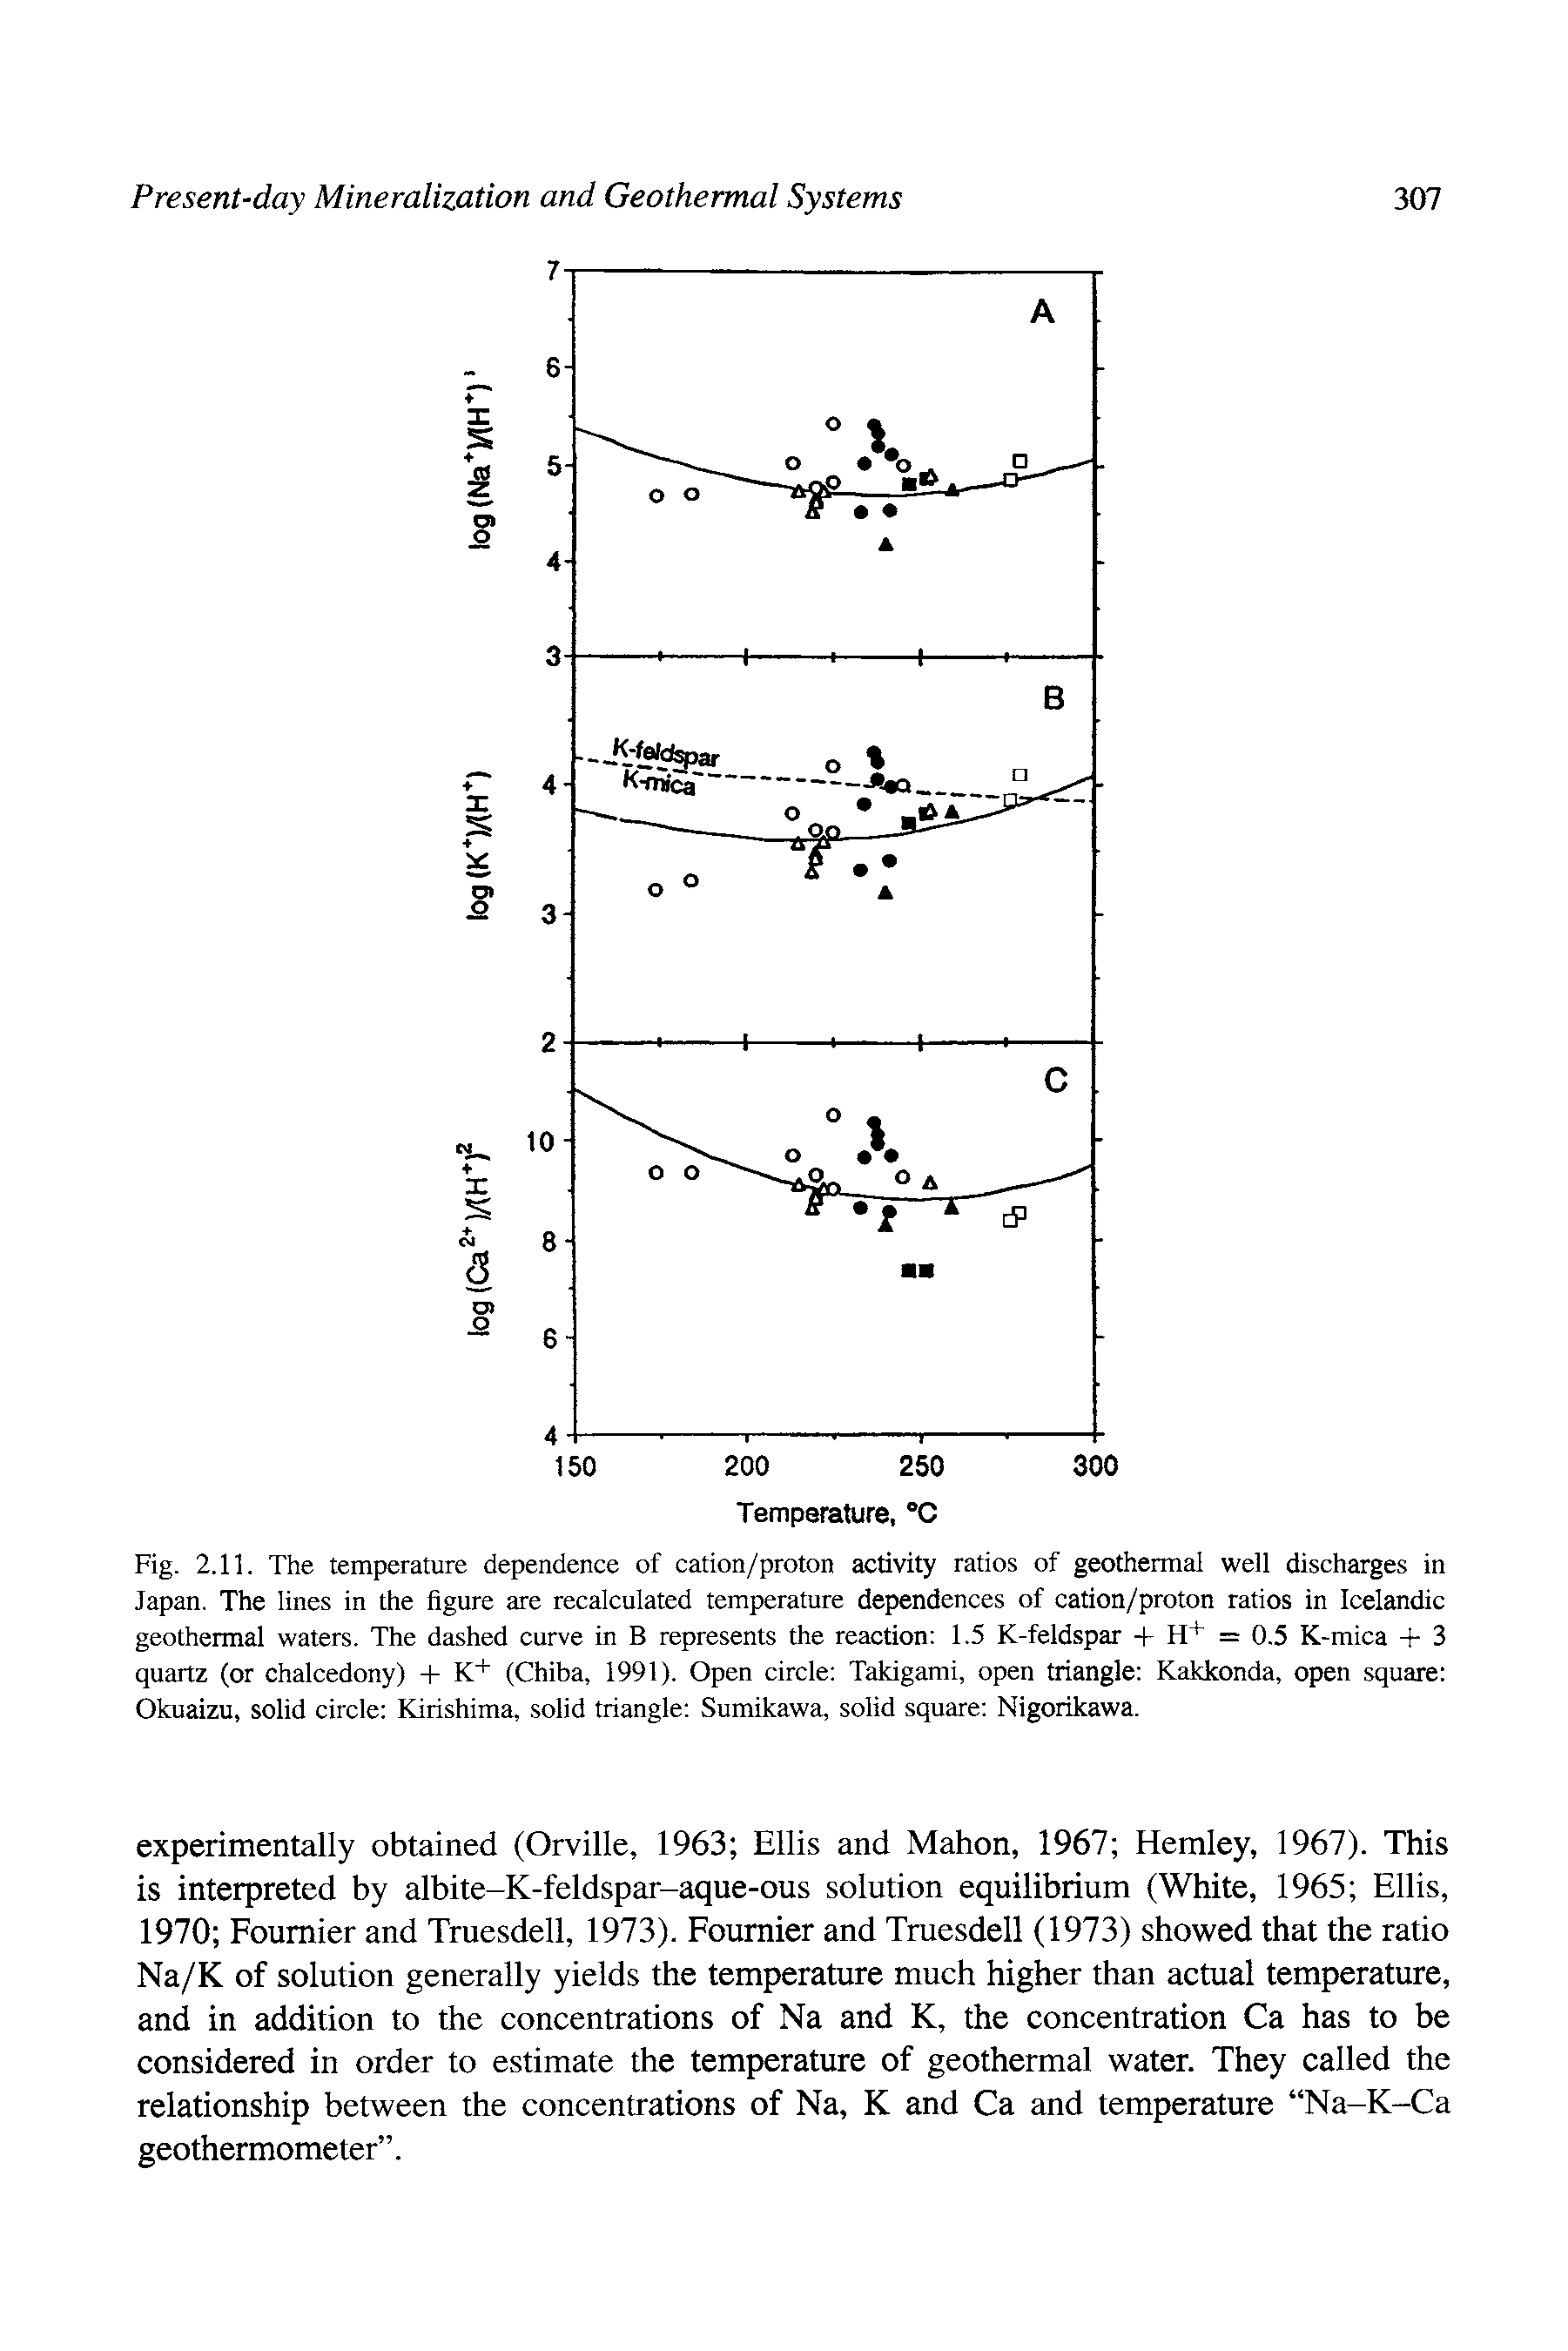 Fig. 2.11. The temperature dependence of cation/proton activity ratios of geothermal well discharges in Japan. The lines in the figure are recalculated temperature dependences of cation/proton ratios in Icelandic geothermal waters. The dashed curve in B represents the reaction 1.5 K-feldspar + H+ = 0.5 K-mica + 3 quartz (or chalcedony) + K+ (Chiba, 1991). Open circle Takigami, open triangle Kakkonda, open square Okuaizu, solid circle Kirishima, solid triangle Sumikawa, solid square Nigoiikawa.